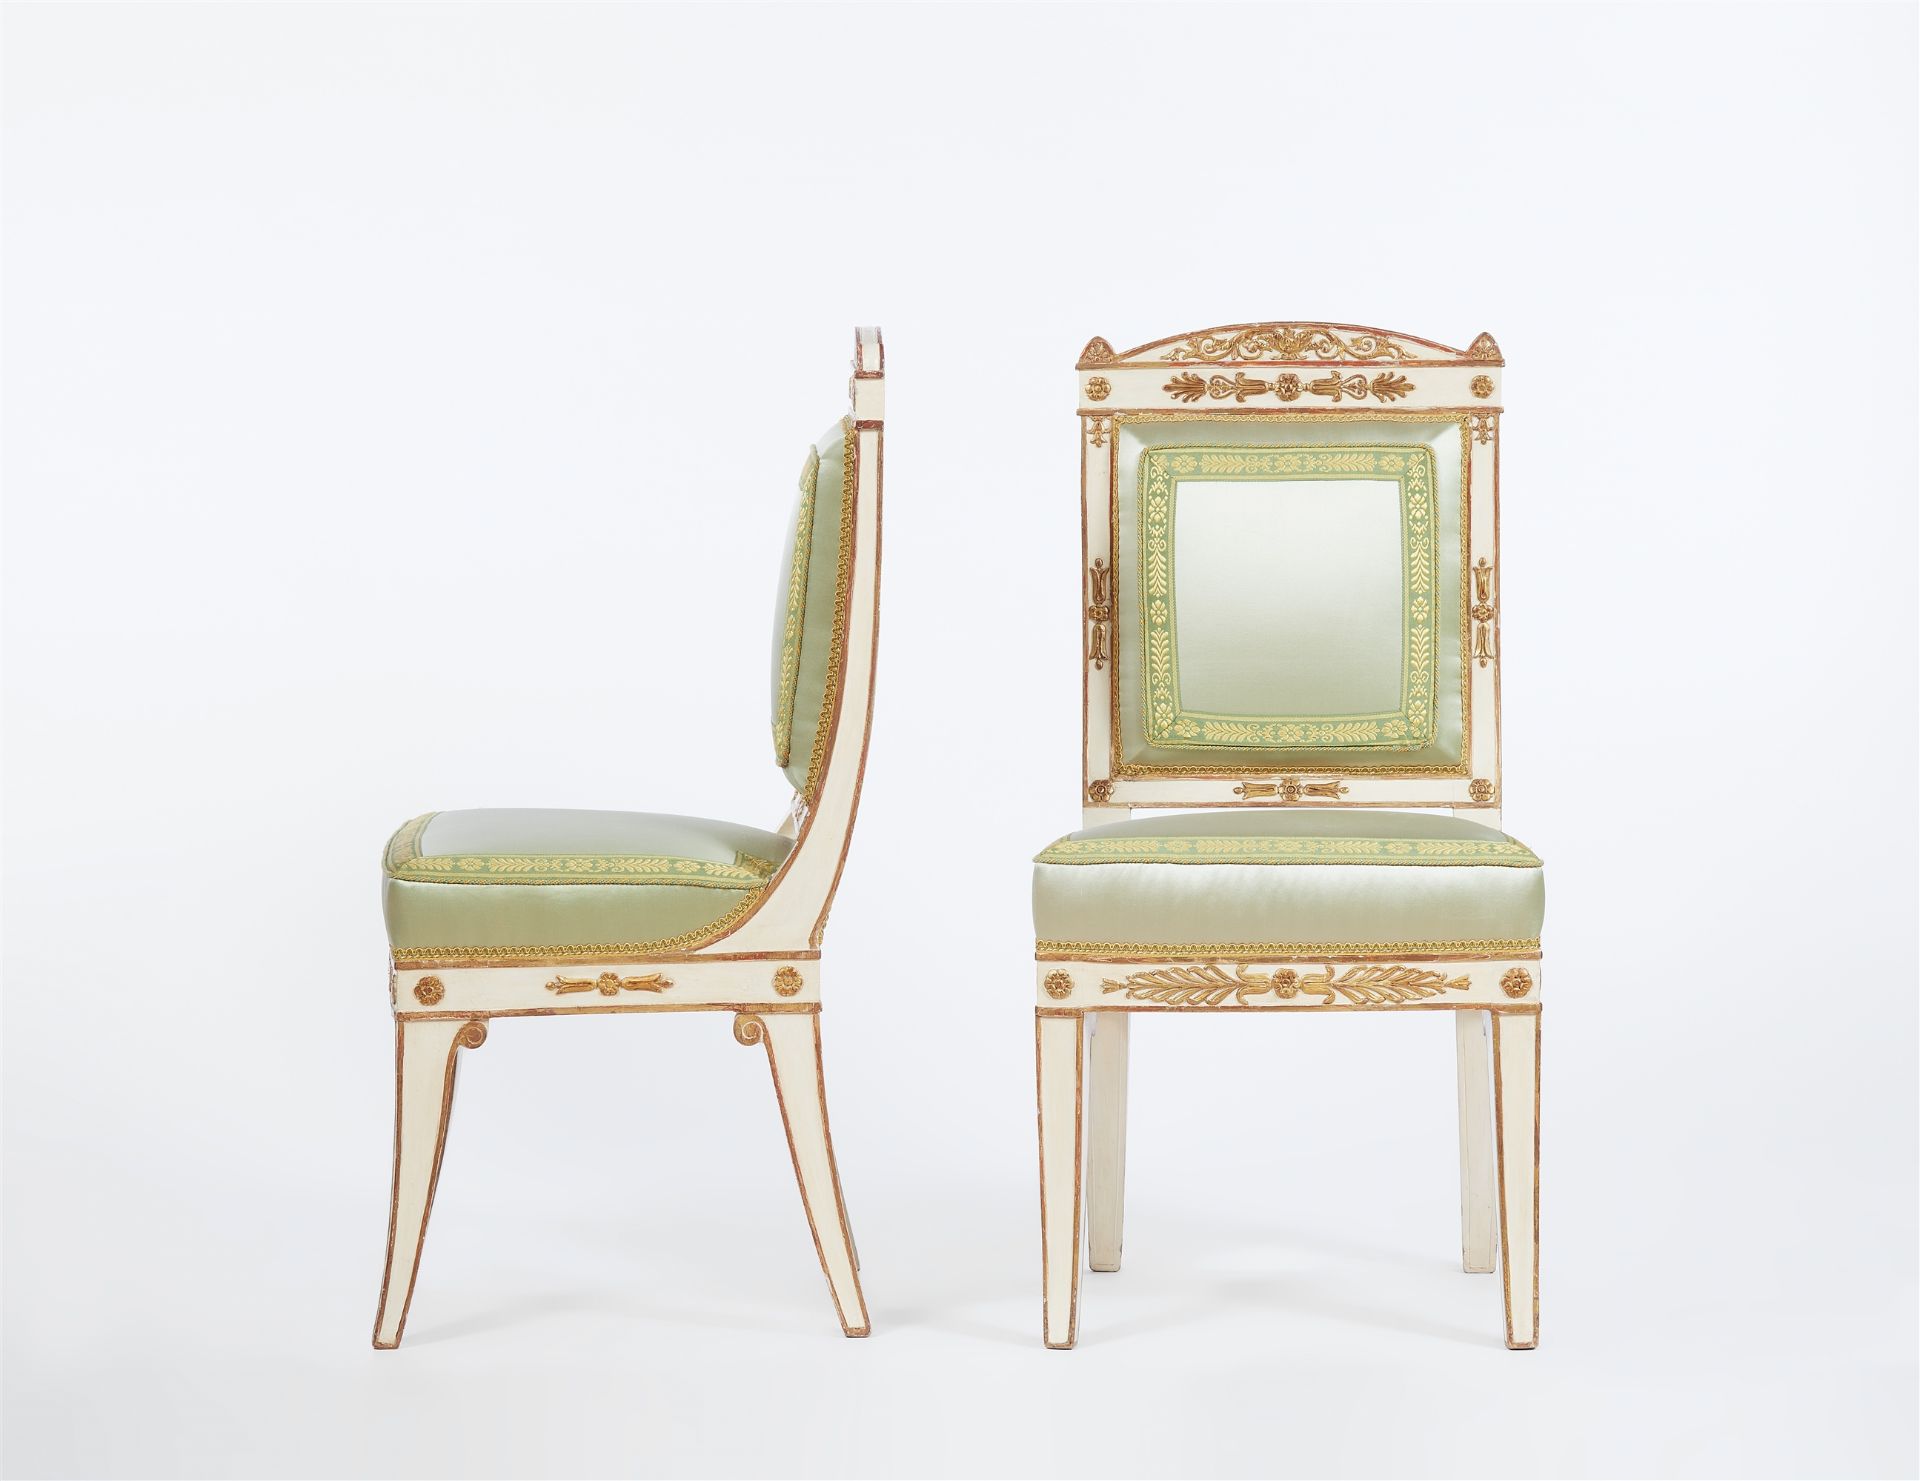 A pair of French Empire chairs